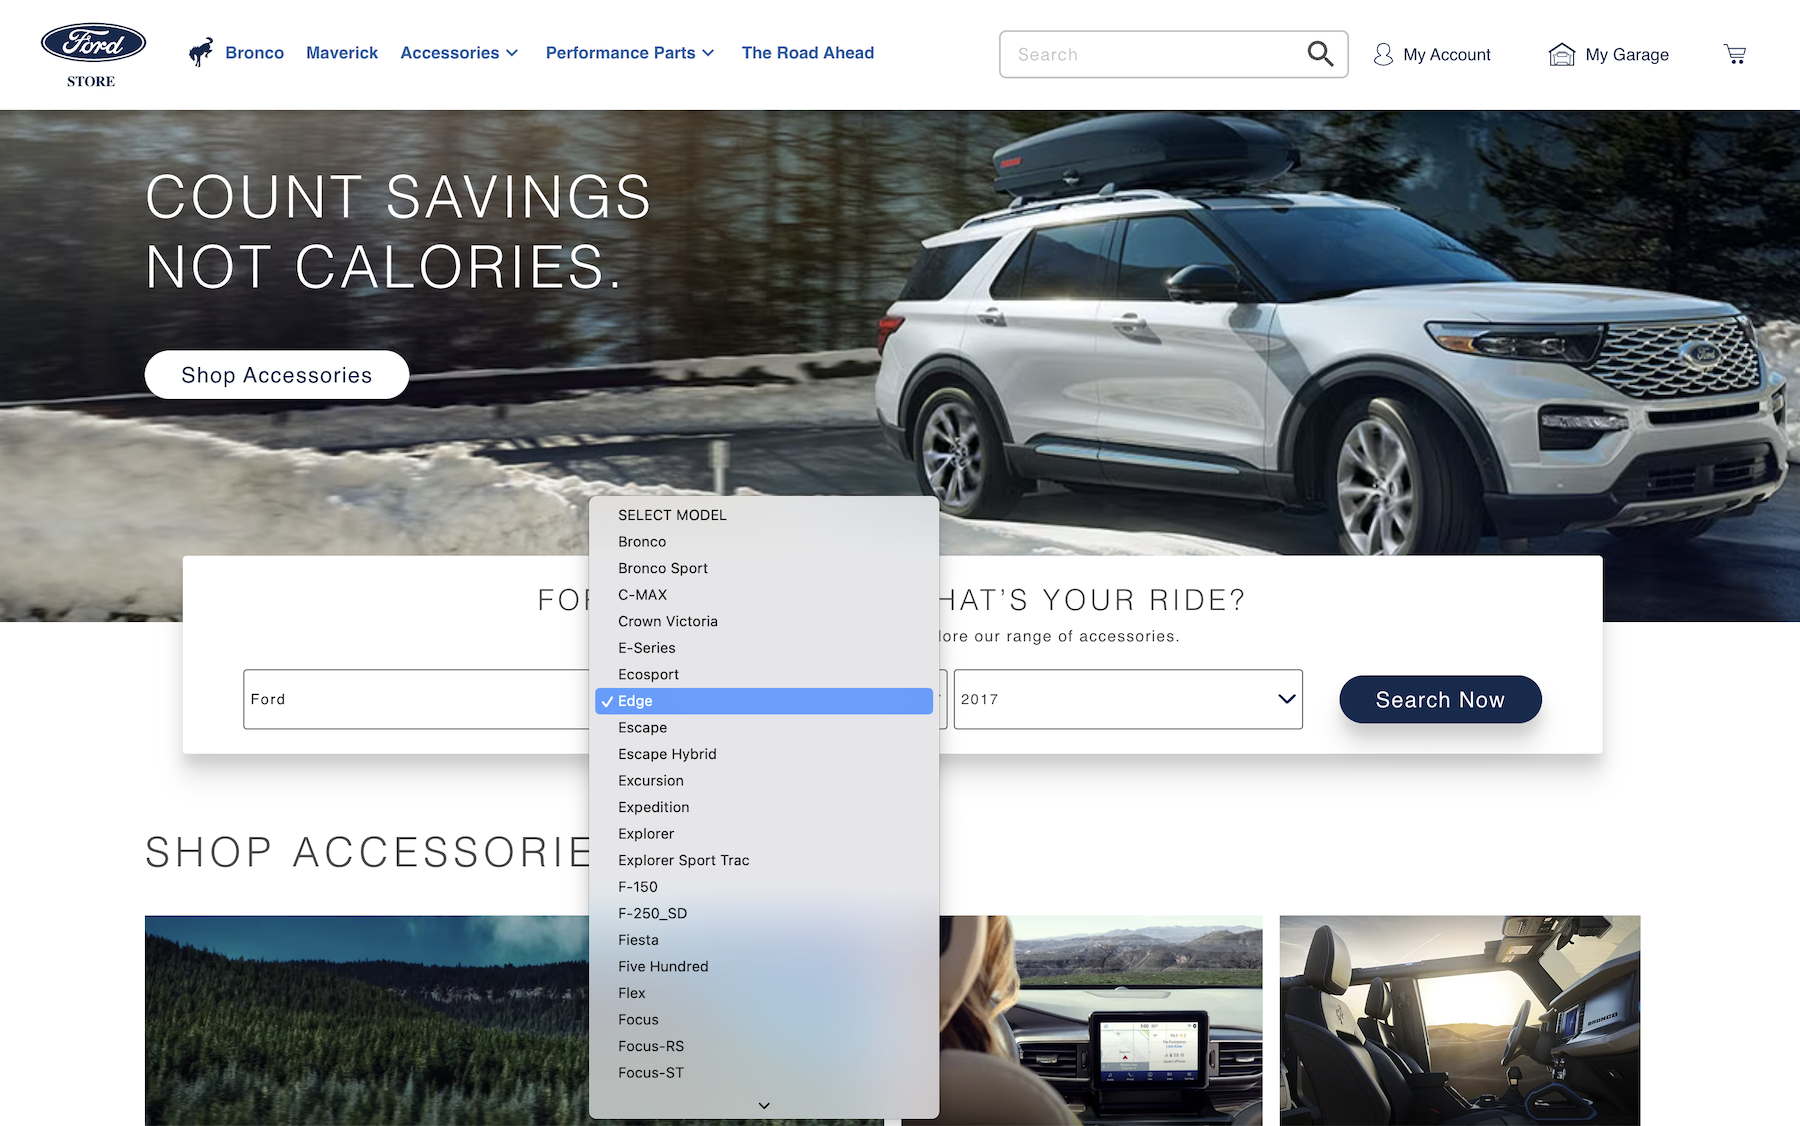 In the Magento ecommerce website with Ford accessories, you can specify the target car model.